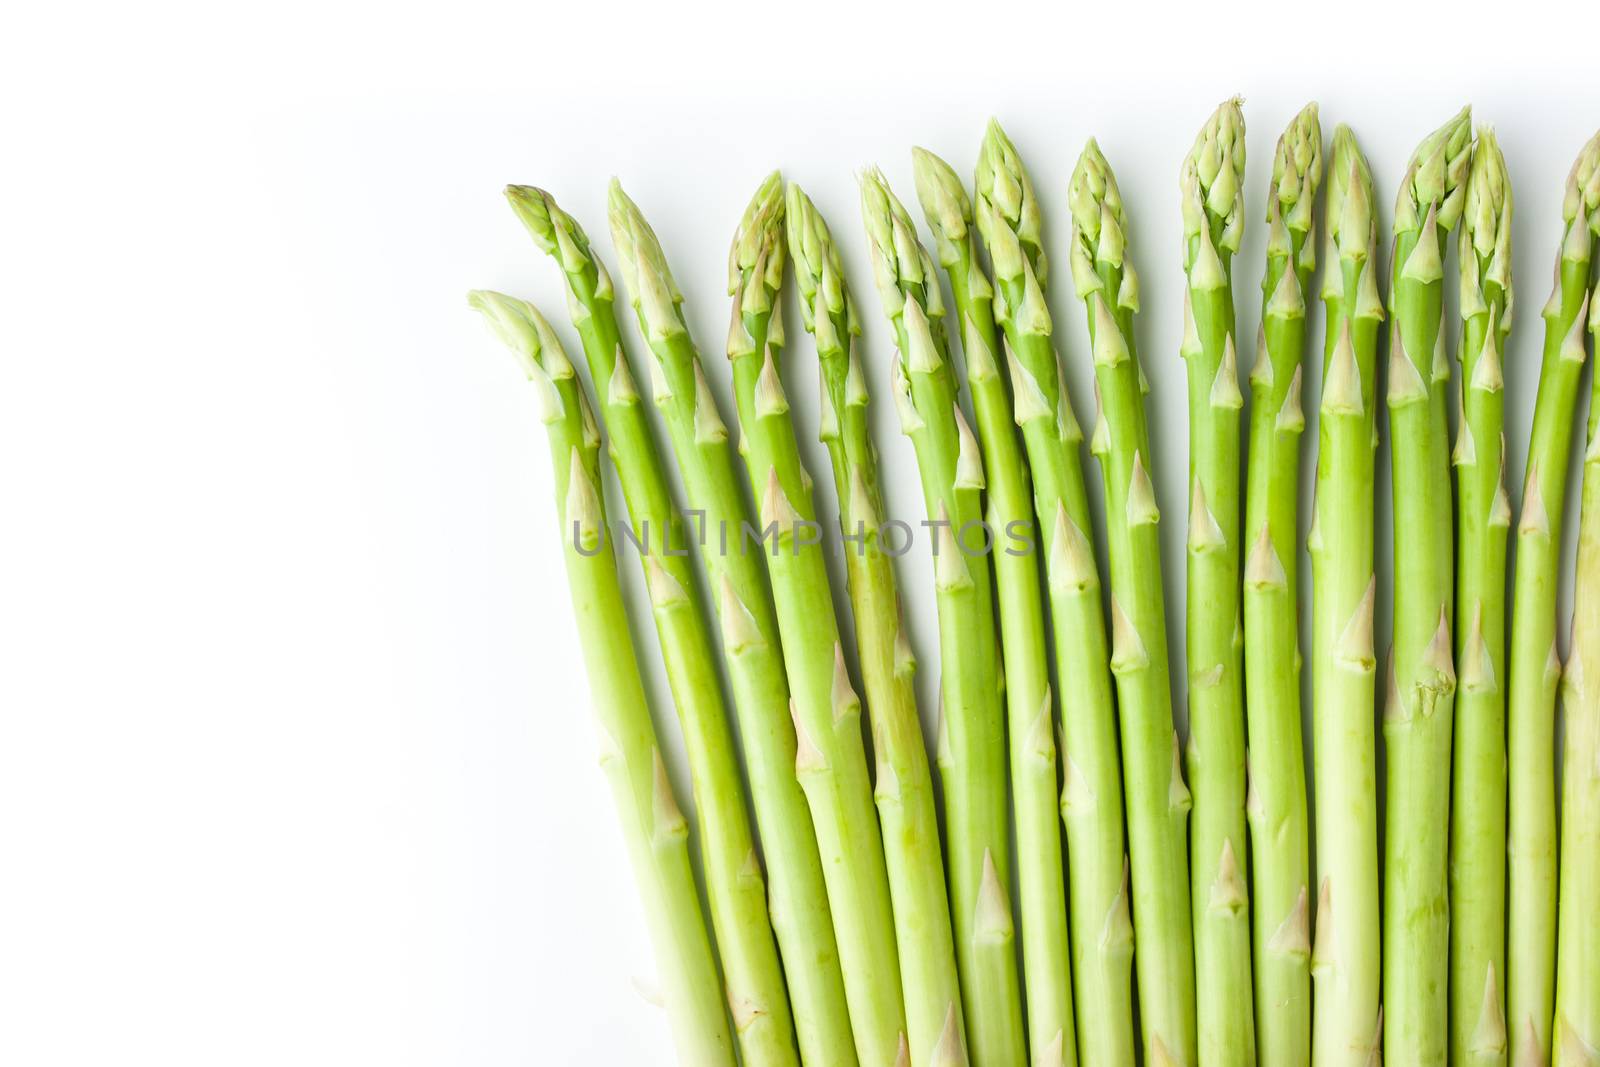 Green asparagus at the right of white background